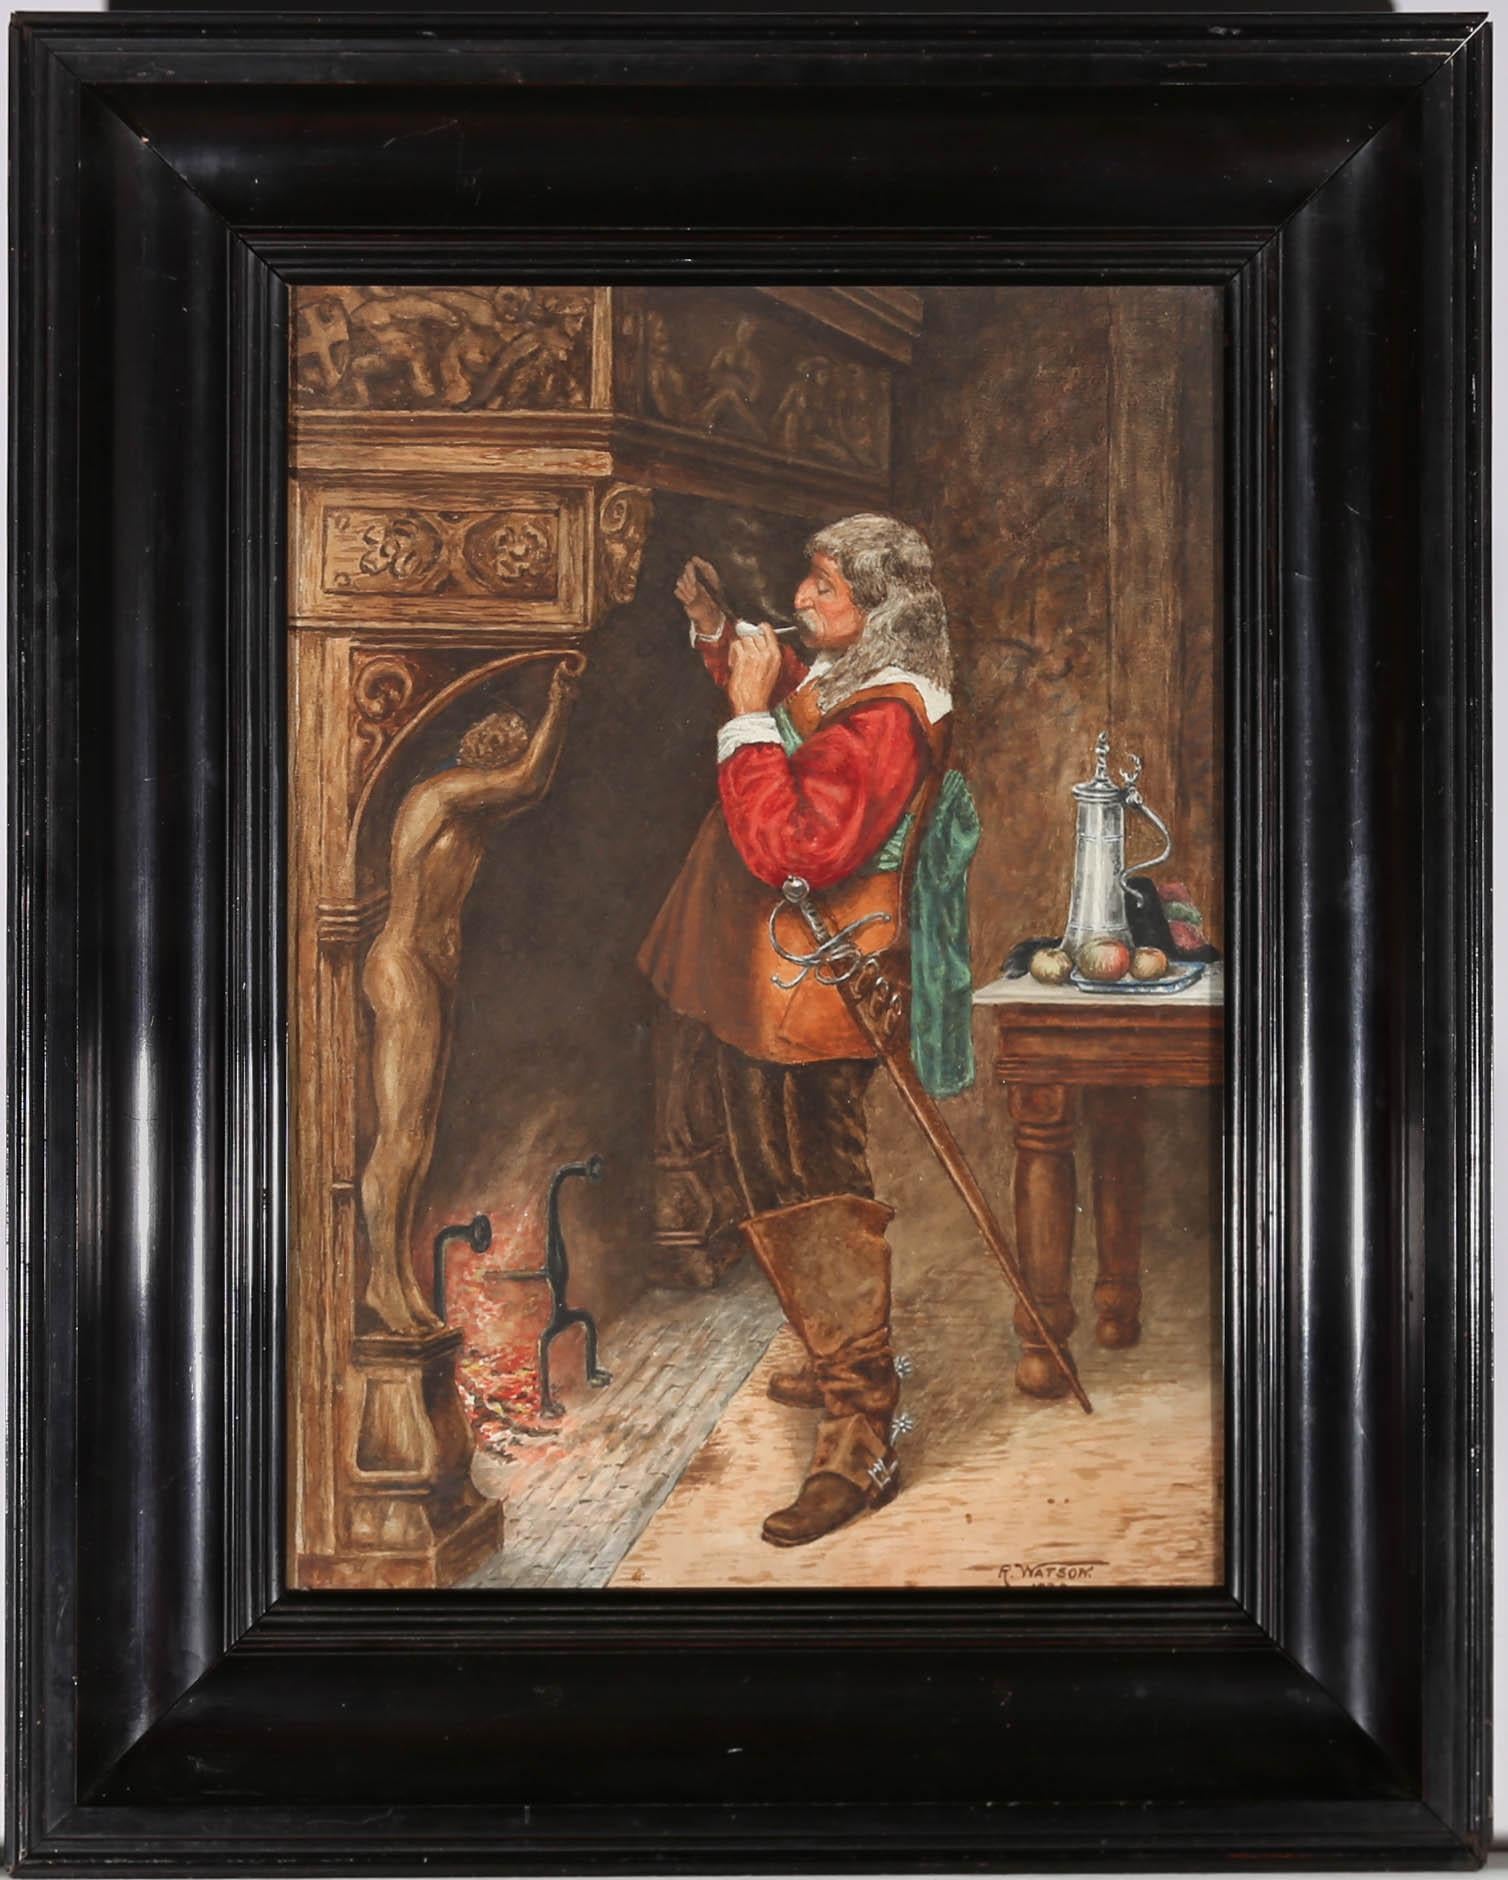 A fine early 20th Century interior scene in watercolour showing a 17th Century Cavalier, lighting his pipe as he stands by a glowing open fire with impressive carved wooden surround. The artist has signed and dated to the lower right corner and the